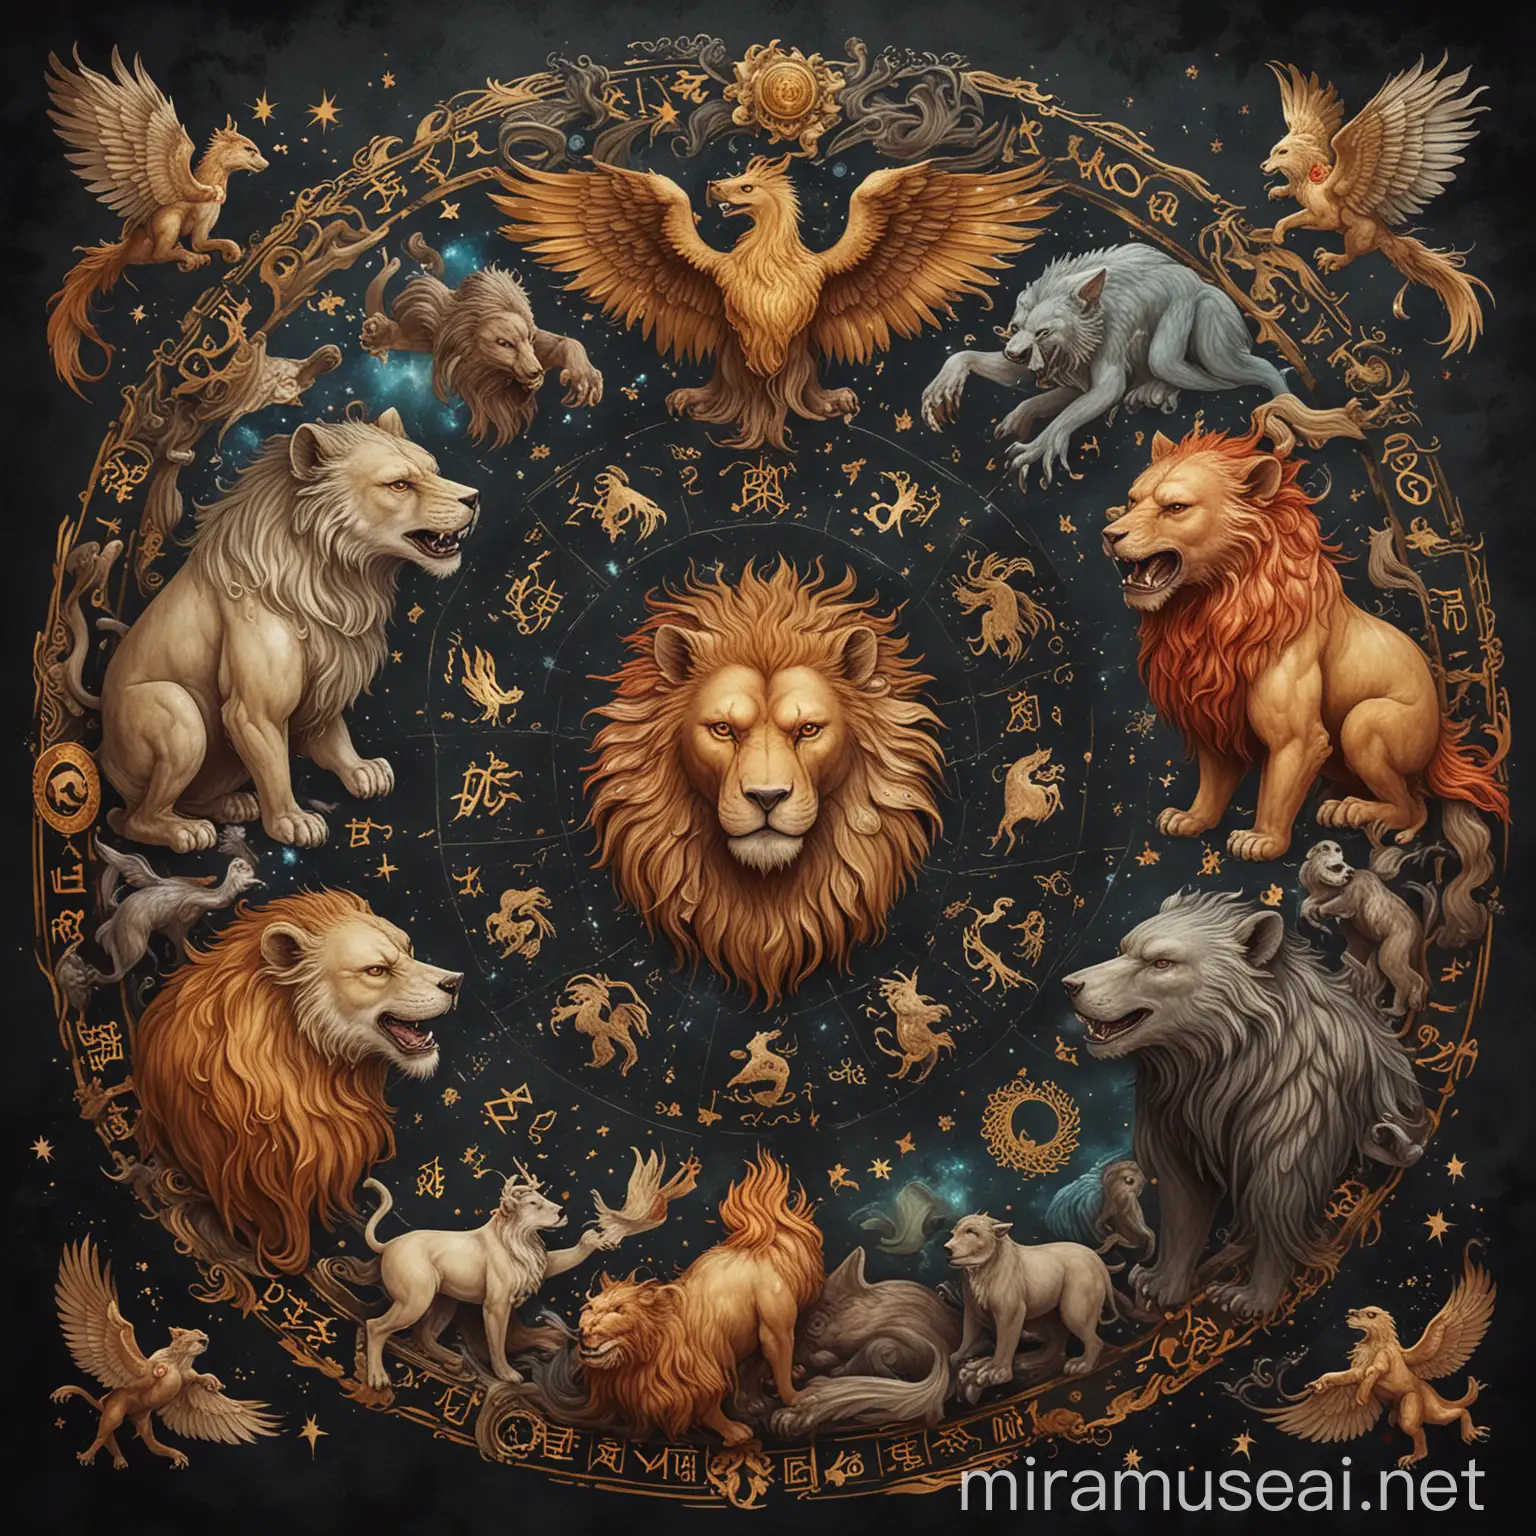 Create Zodiac circle with Four Mythical Animals (a lion, a wolf, a bear, a Pheonix, Monkey) 
(North, South, East, West)